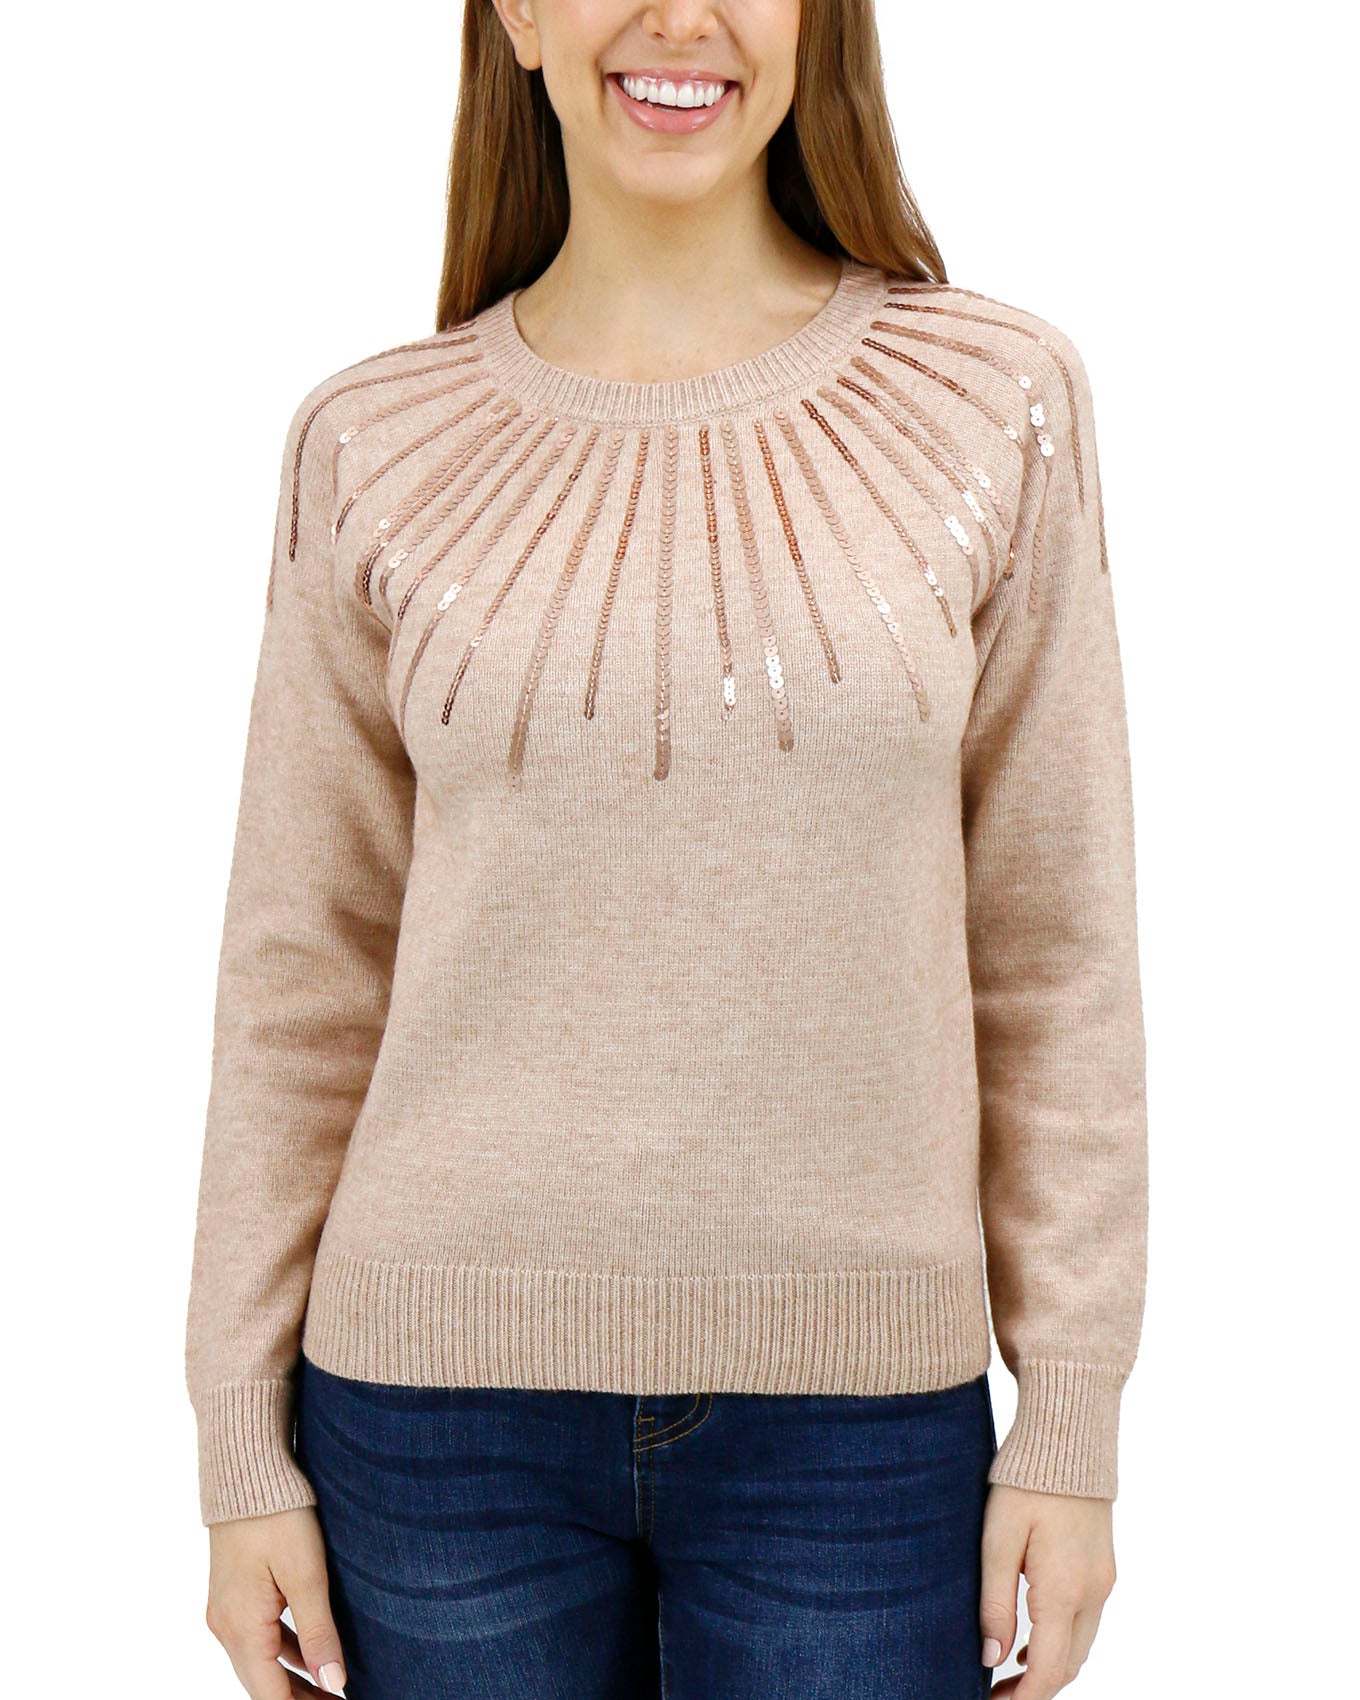 Front view stock shot of Shimmer Sweater